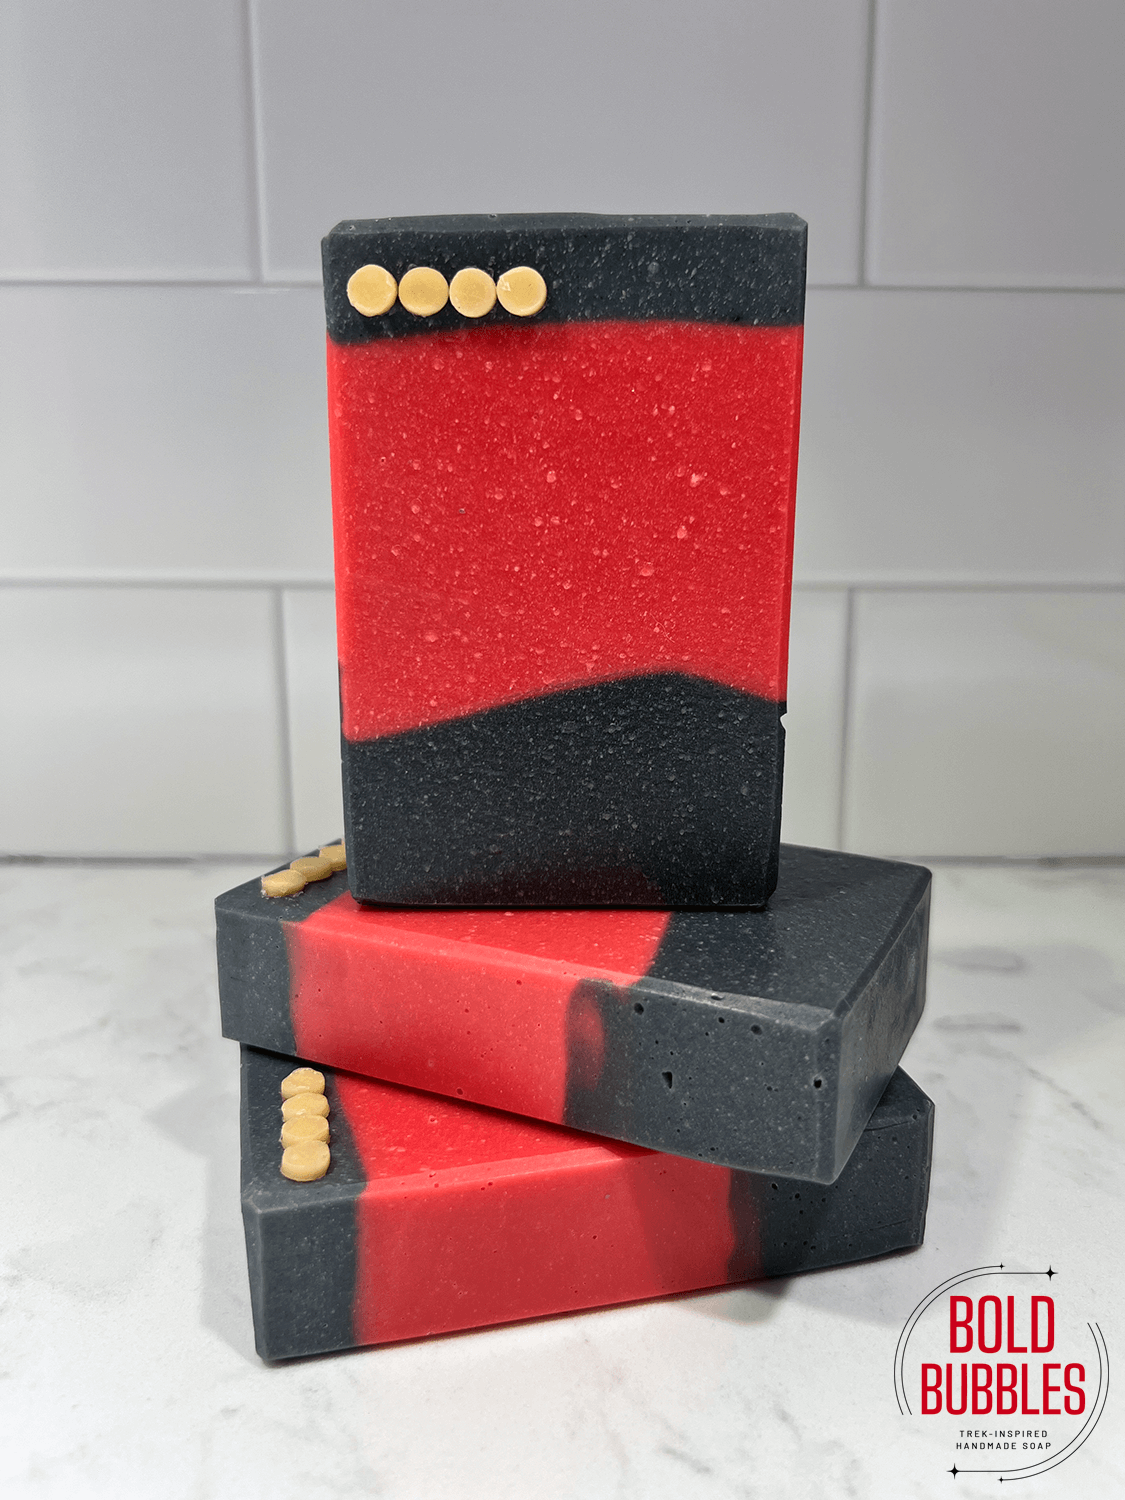 A red and black bar of soap inspired by the iconic Star Trek TNG uniform.